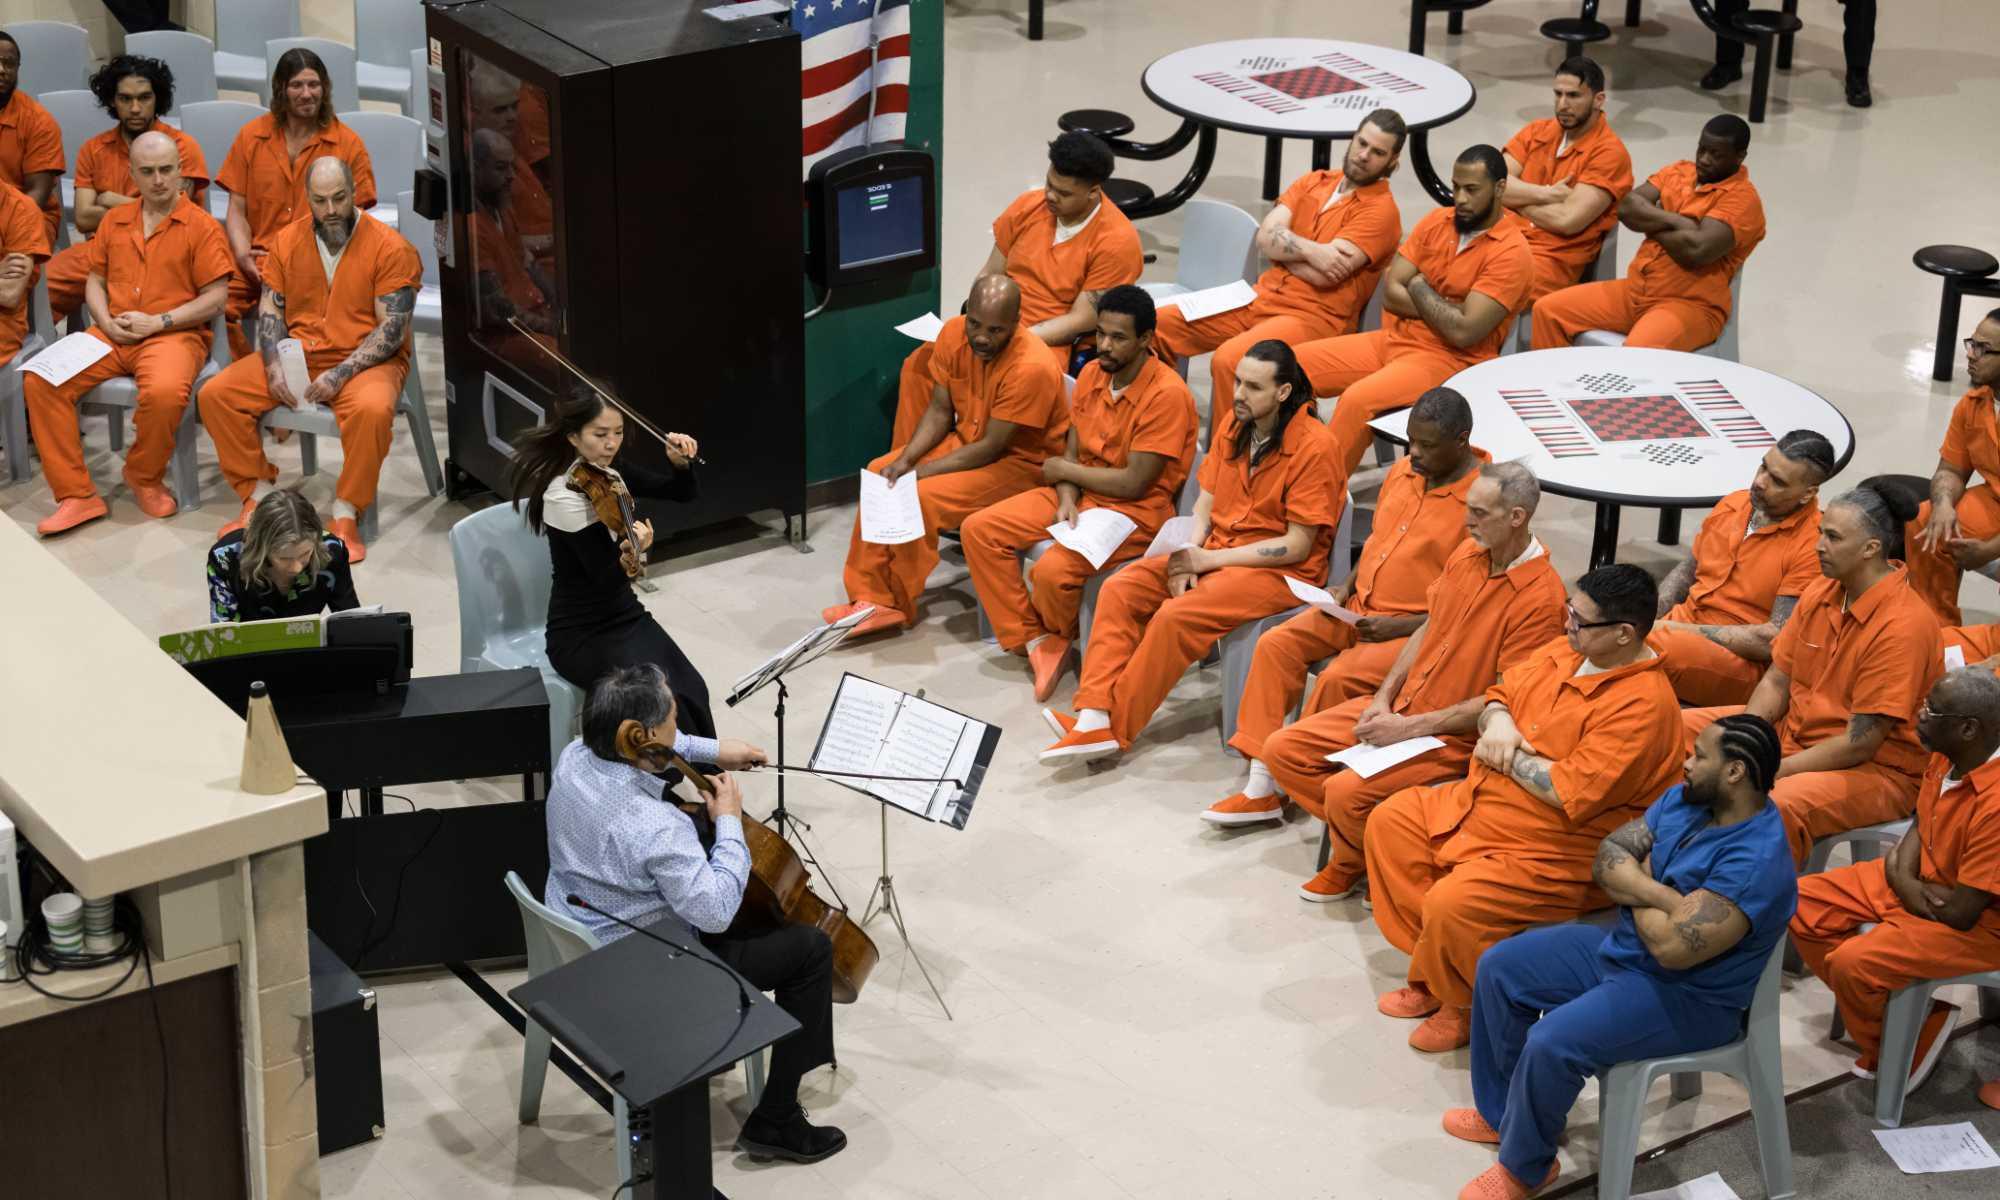 Elevated view of ROC City Concert performs playing music for incarcerated individuals.